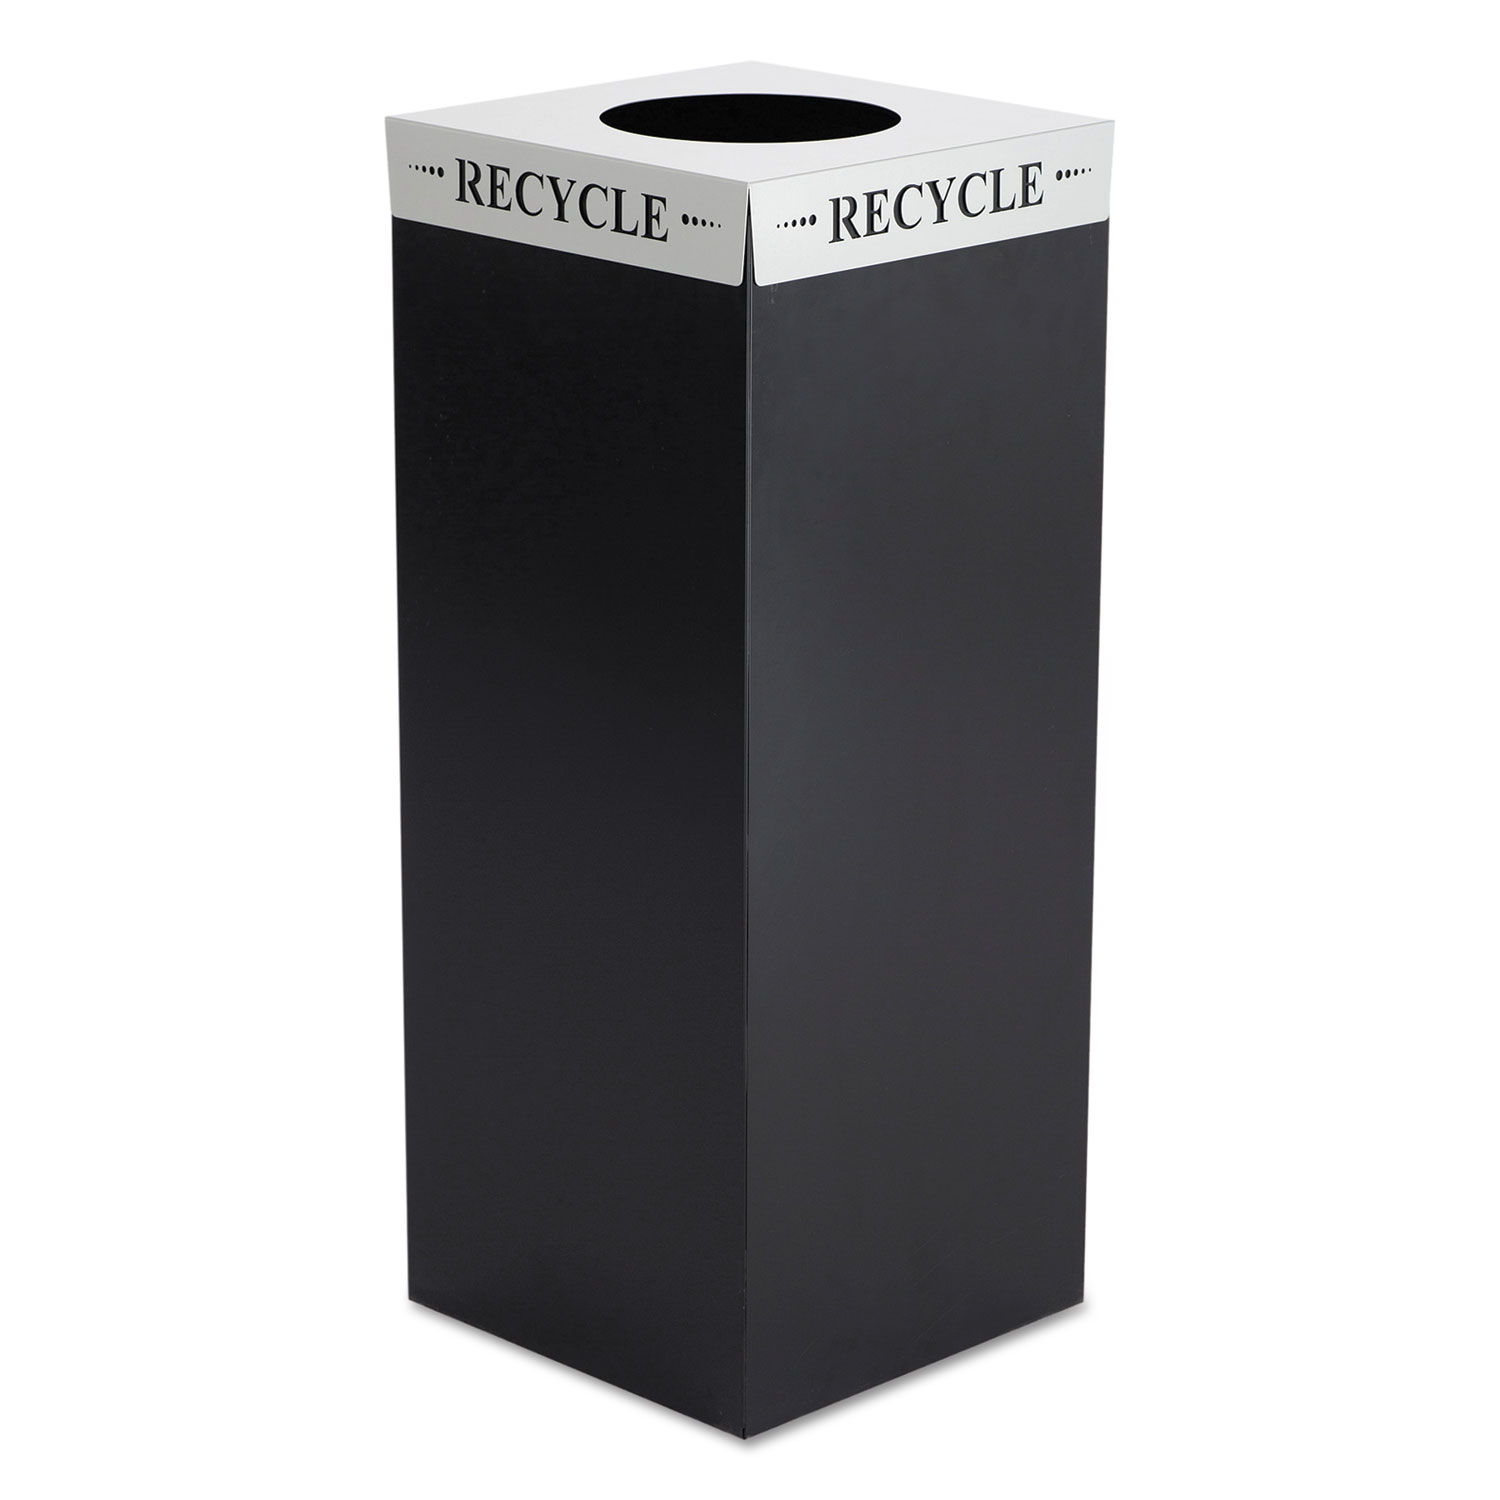  Safco 2990RE Square-Fecta Lid, Recycle, 15.5w x 15.5d x 3h, Silver (SAF2990RE) 